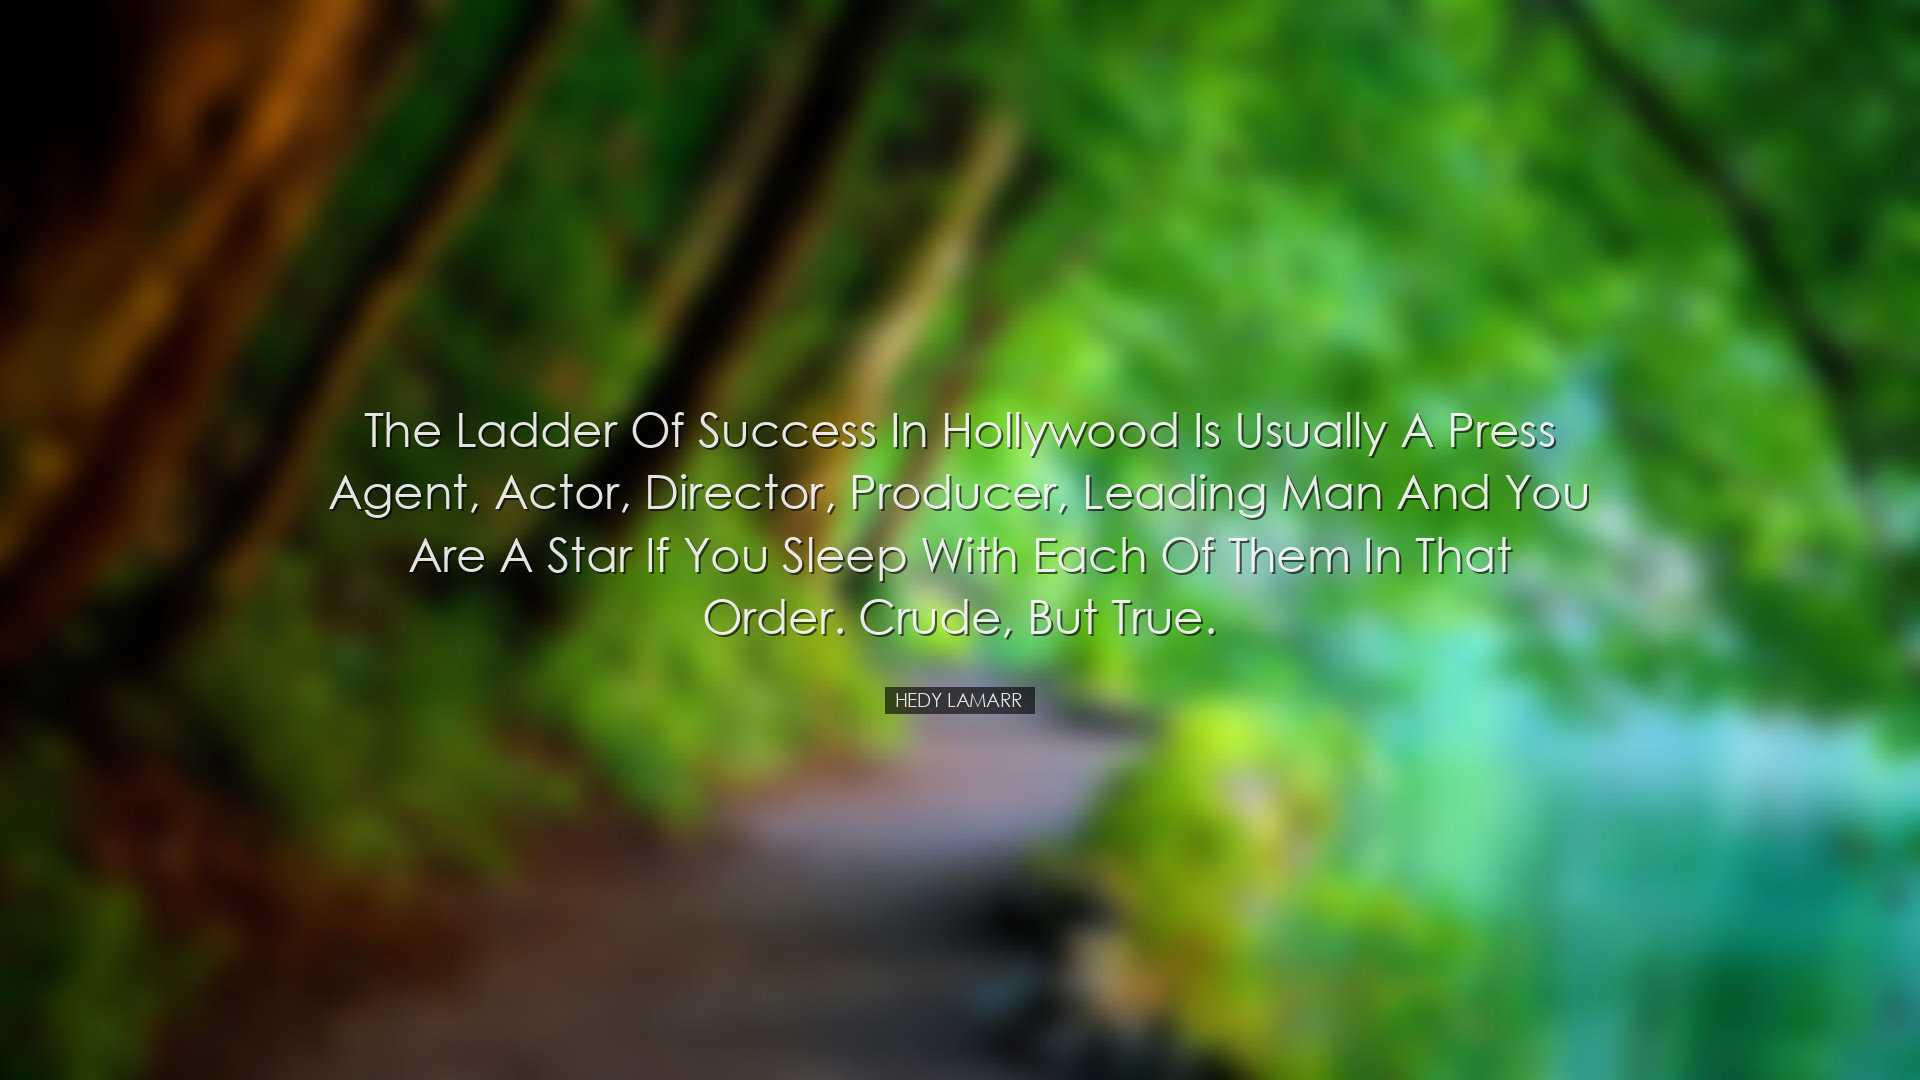 The ladder of success in Hollywood is usually a press agent, actor